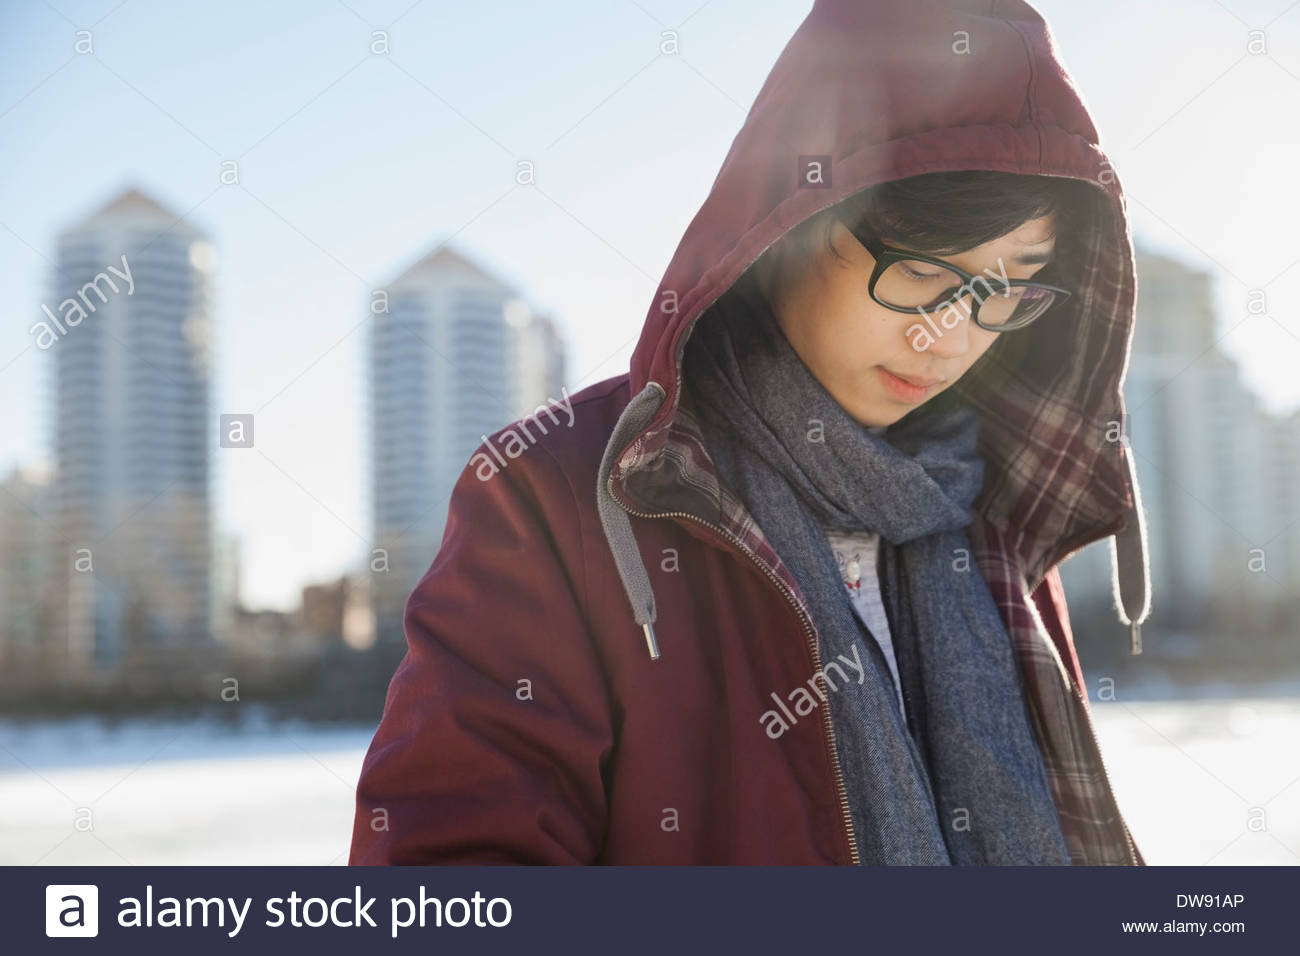 Young man with hooded jacket looking down outdoors Stock Photo